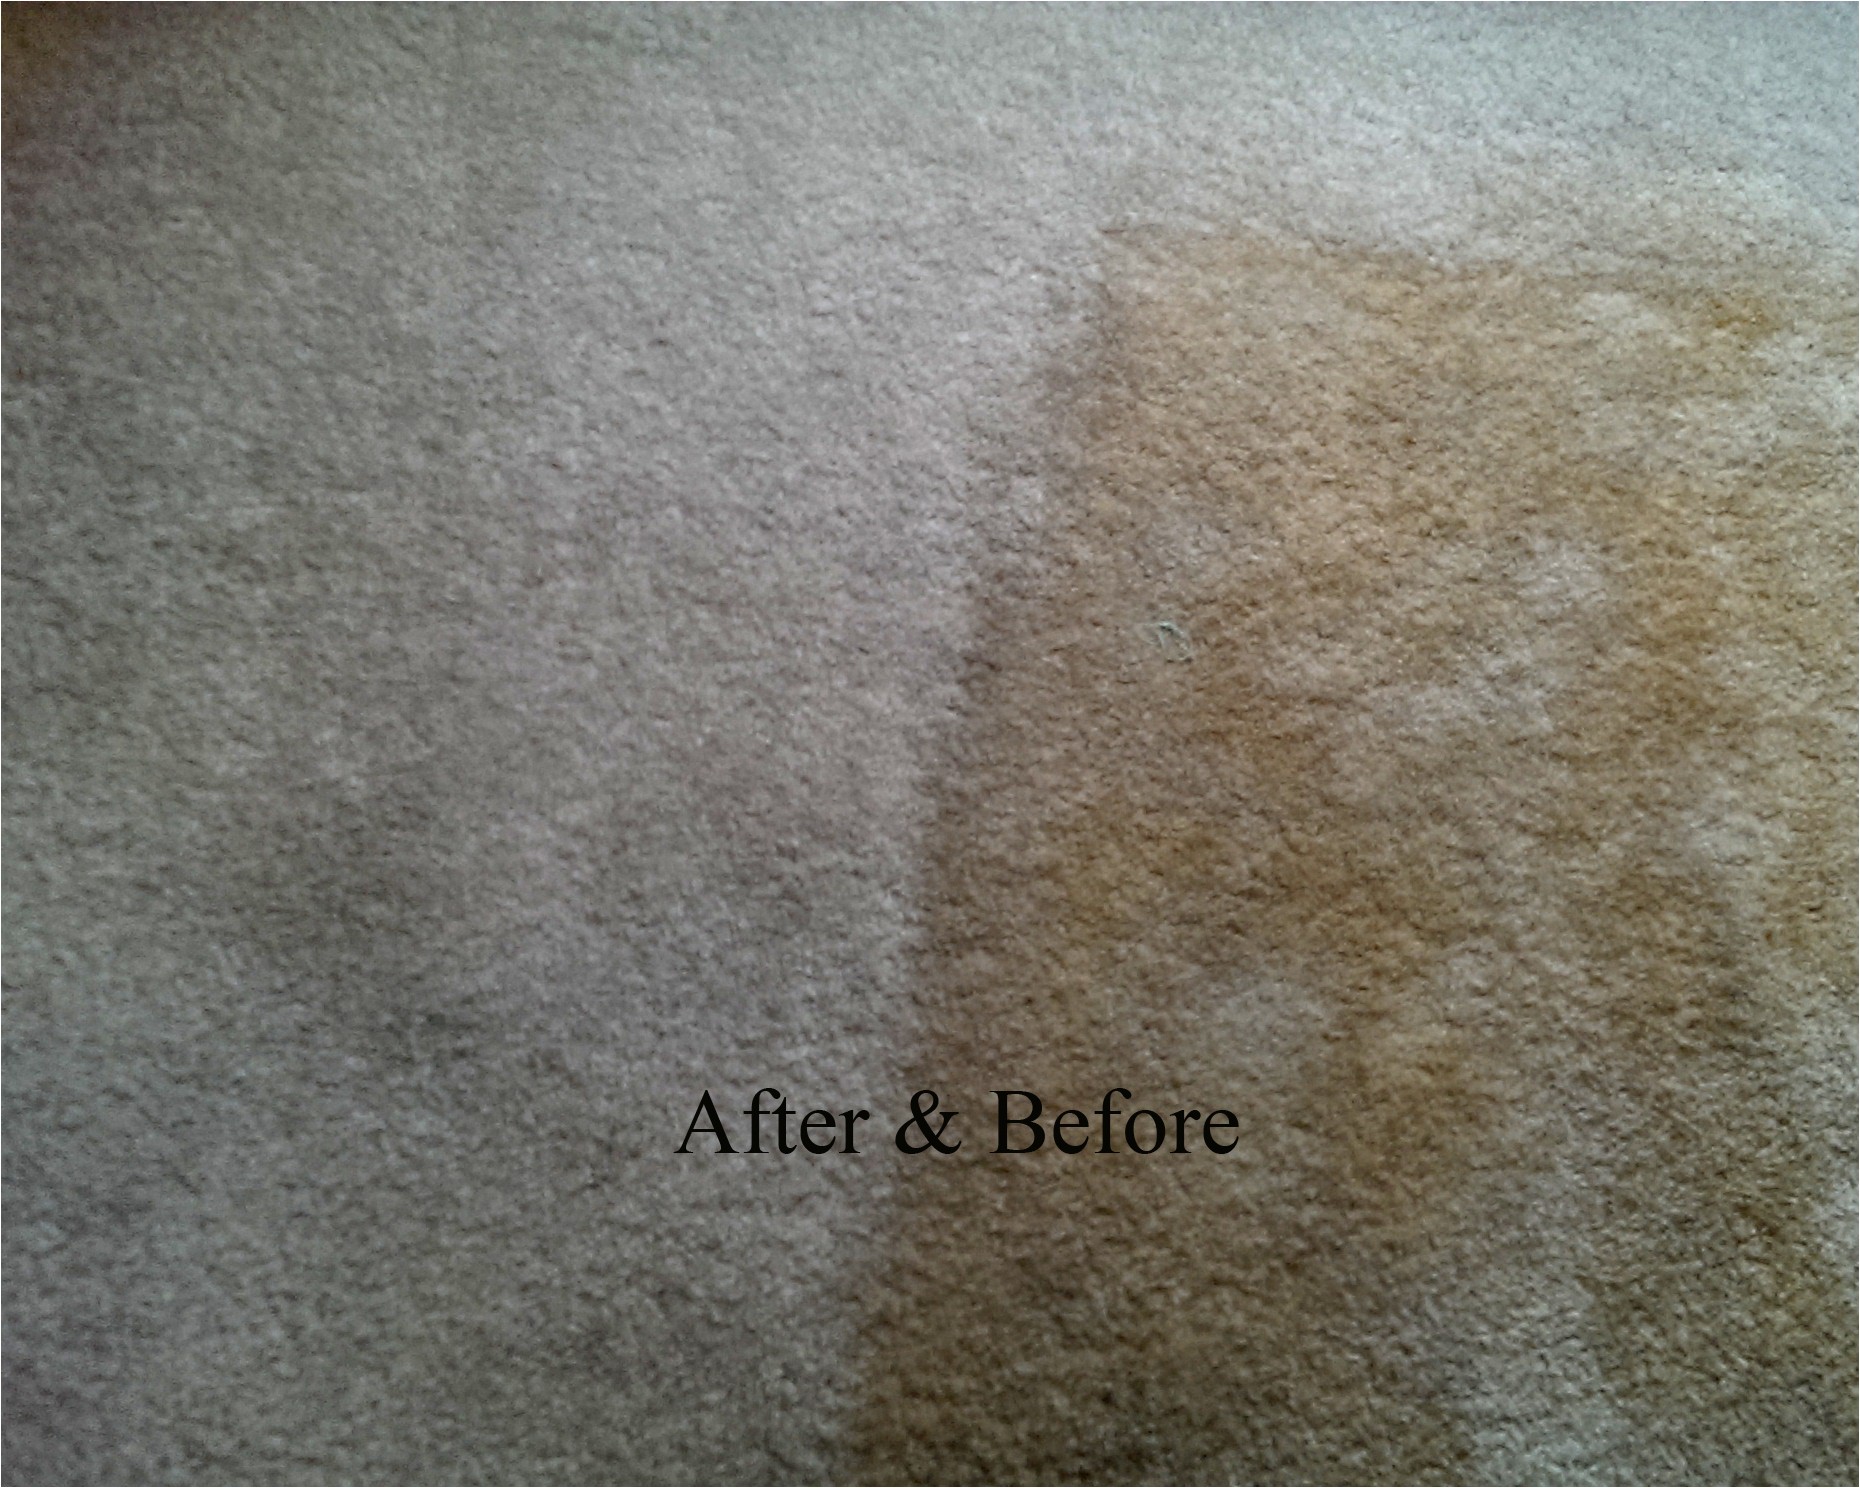 Personal touch Carpet Cleaning Chillicothe Ohio Personal touch Carpet Cleaning Chillicothe Oh 45601 Yp Com